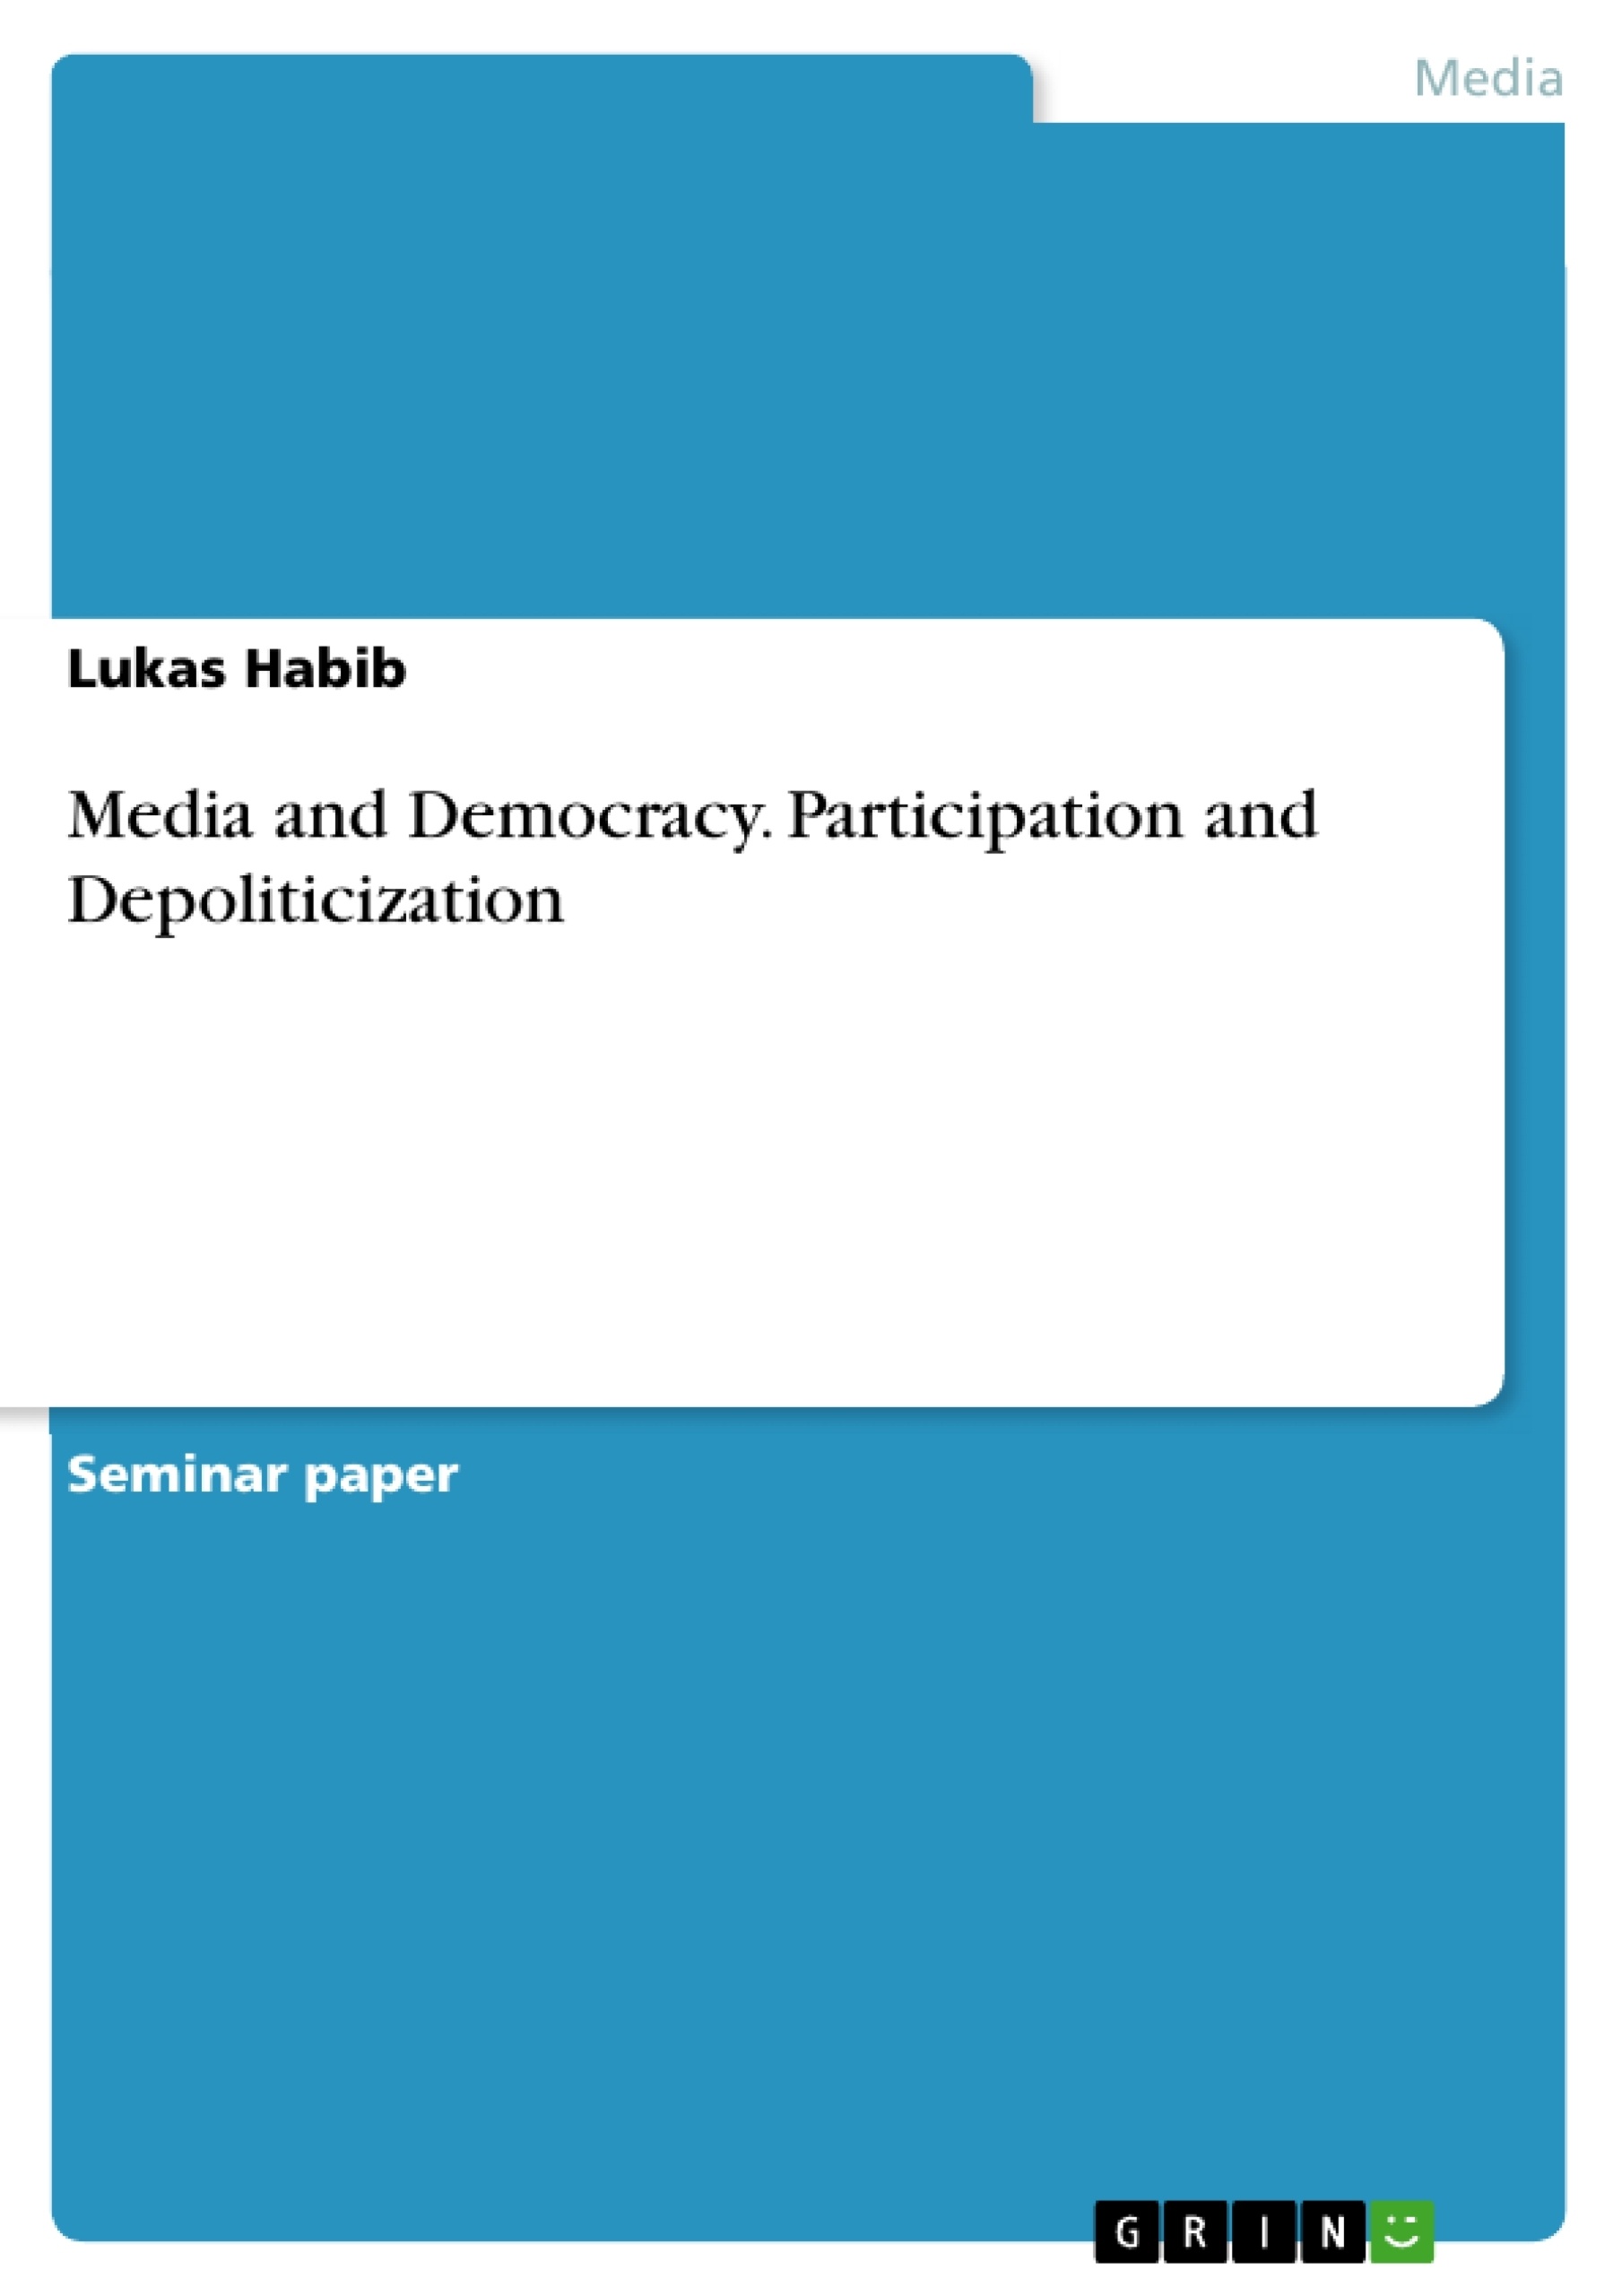 Title: Media and Democracy. Participation and Depoliticization